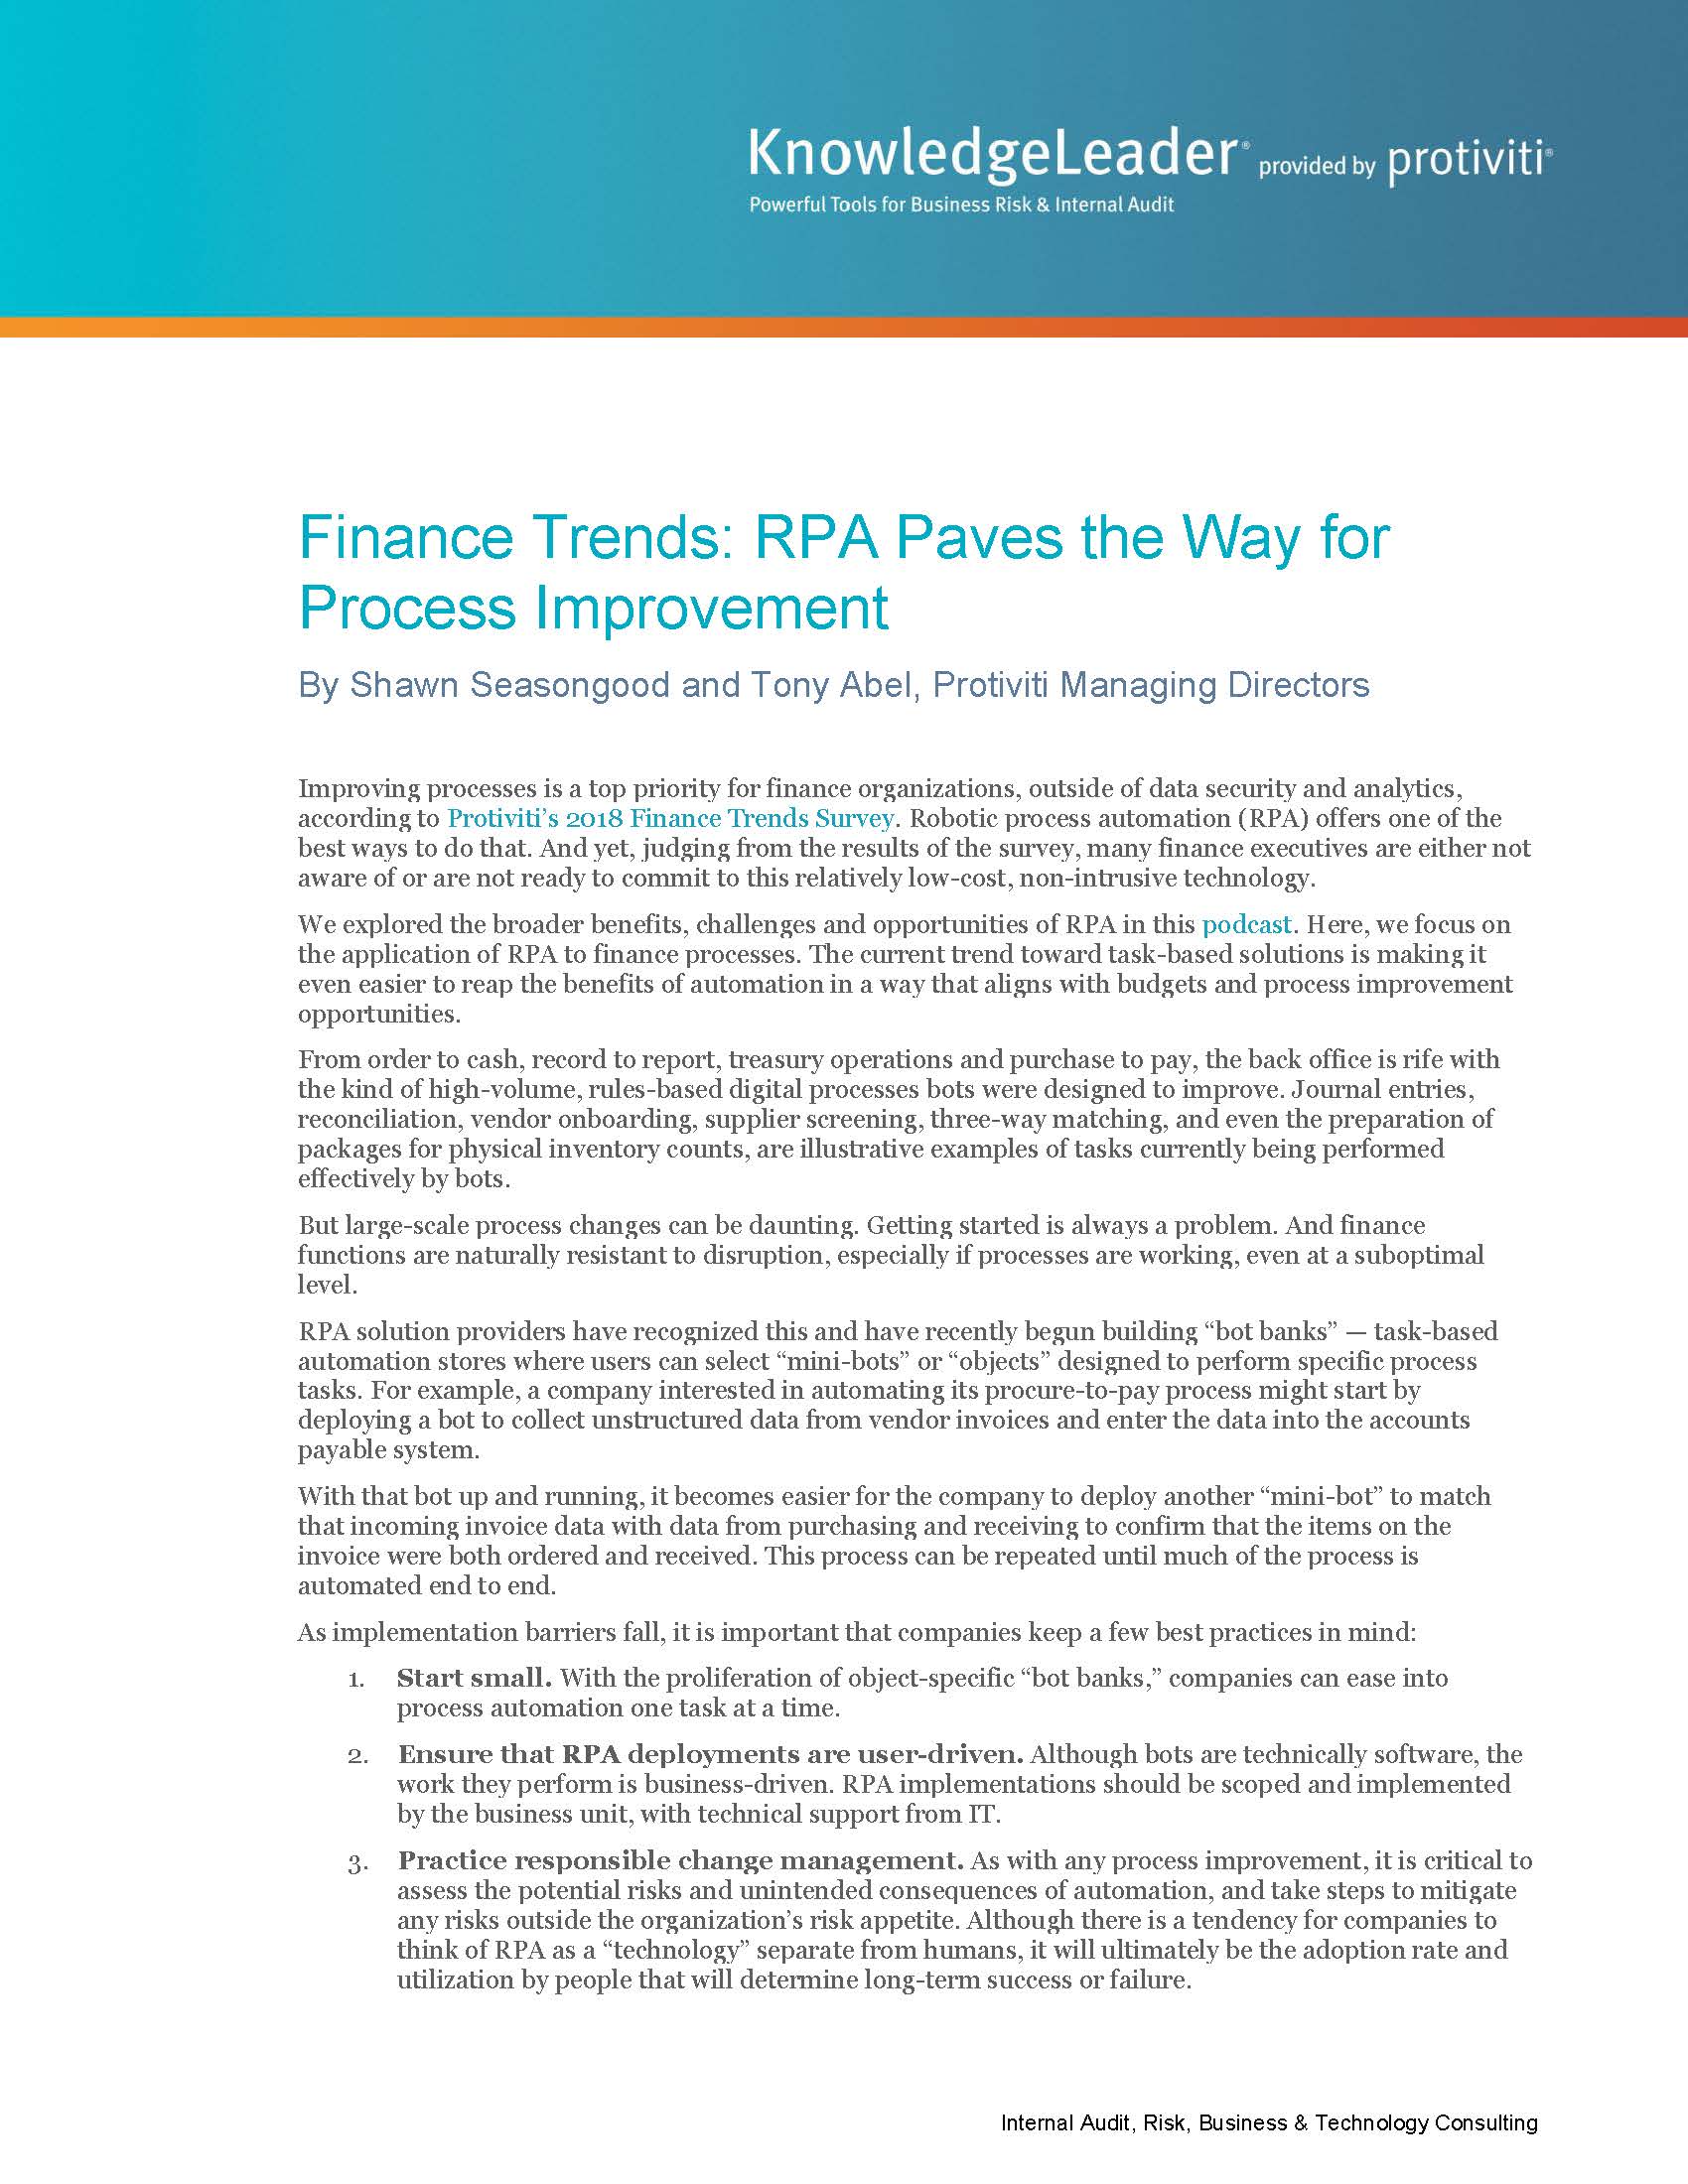 Screenshot of the first page of Finance Trends RPA Paves the Way for Process Improvement